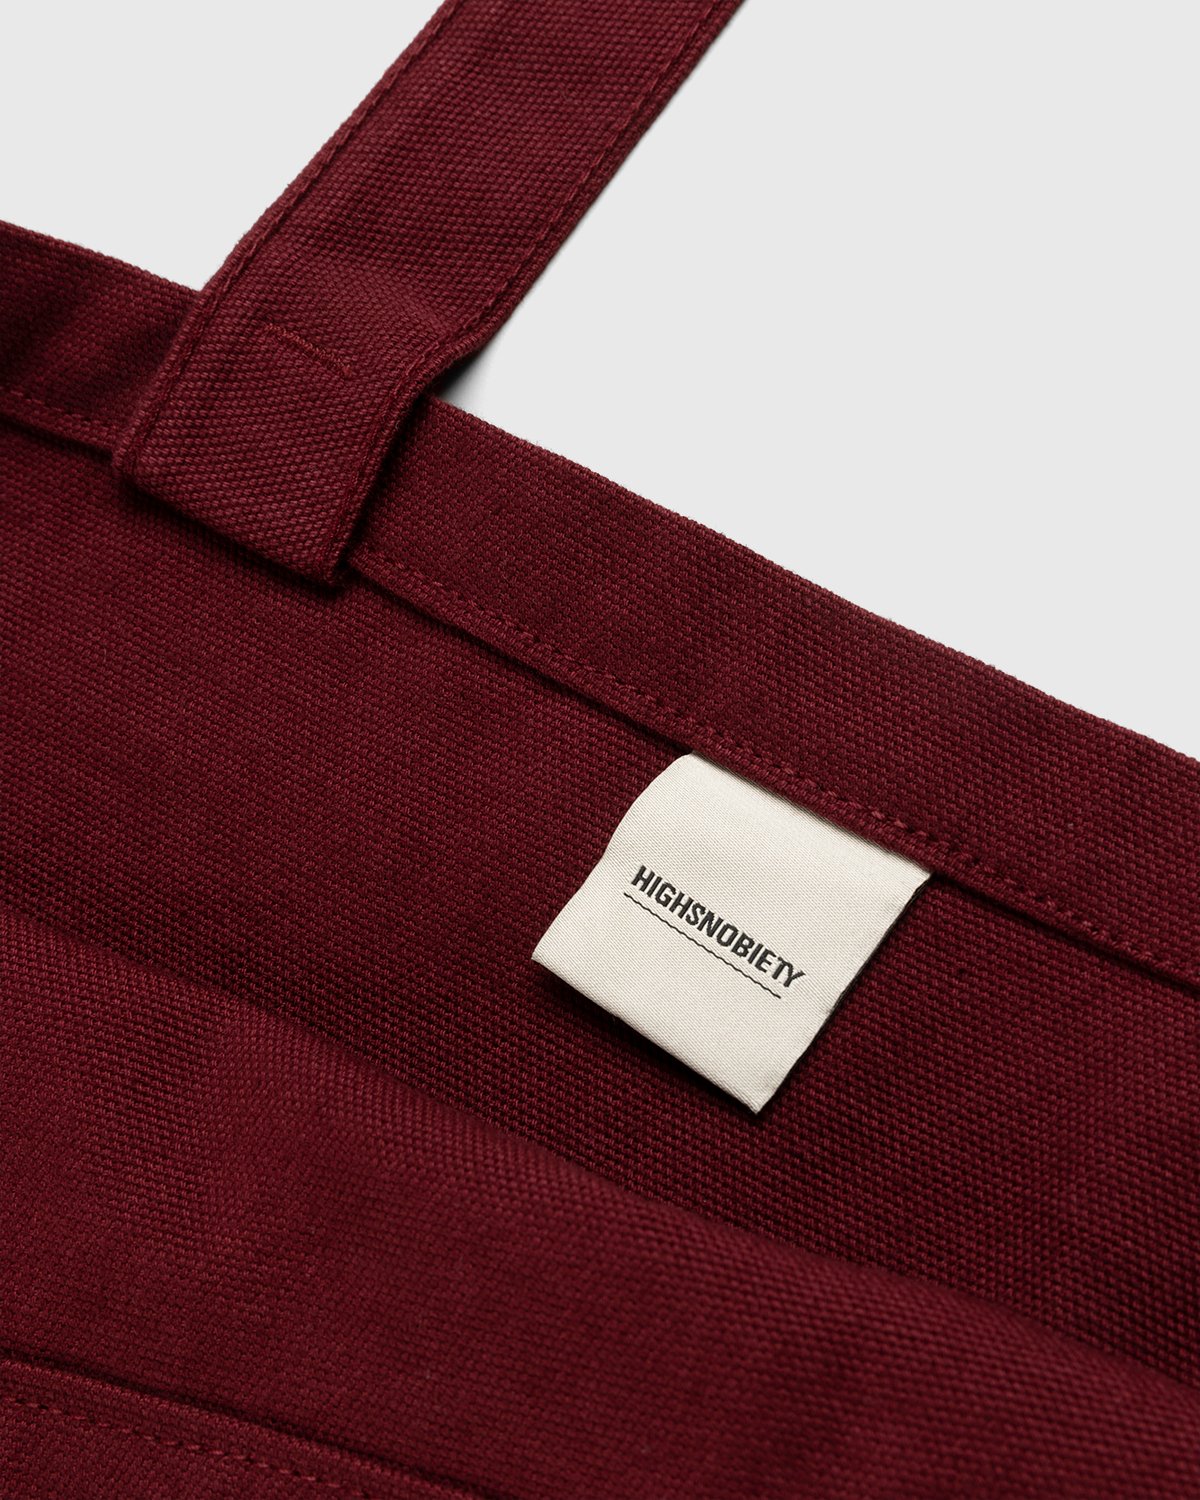 Highsnobiety - HS Sports Logo Tote Bag Bordeaux - Accessories - Red - Image 3